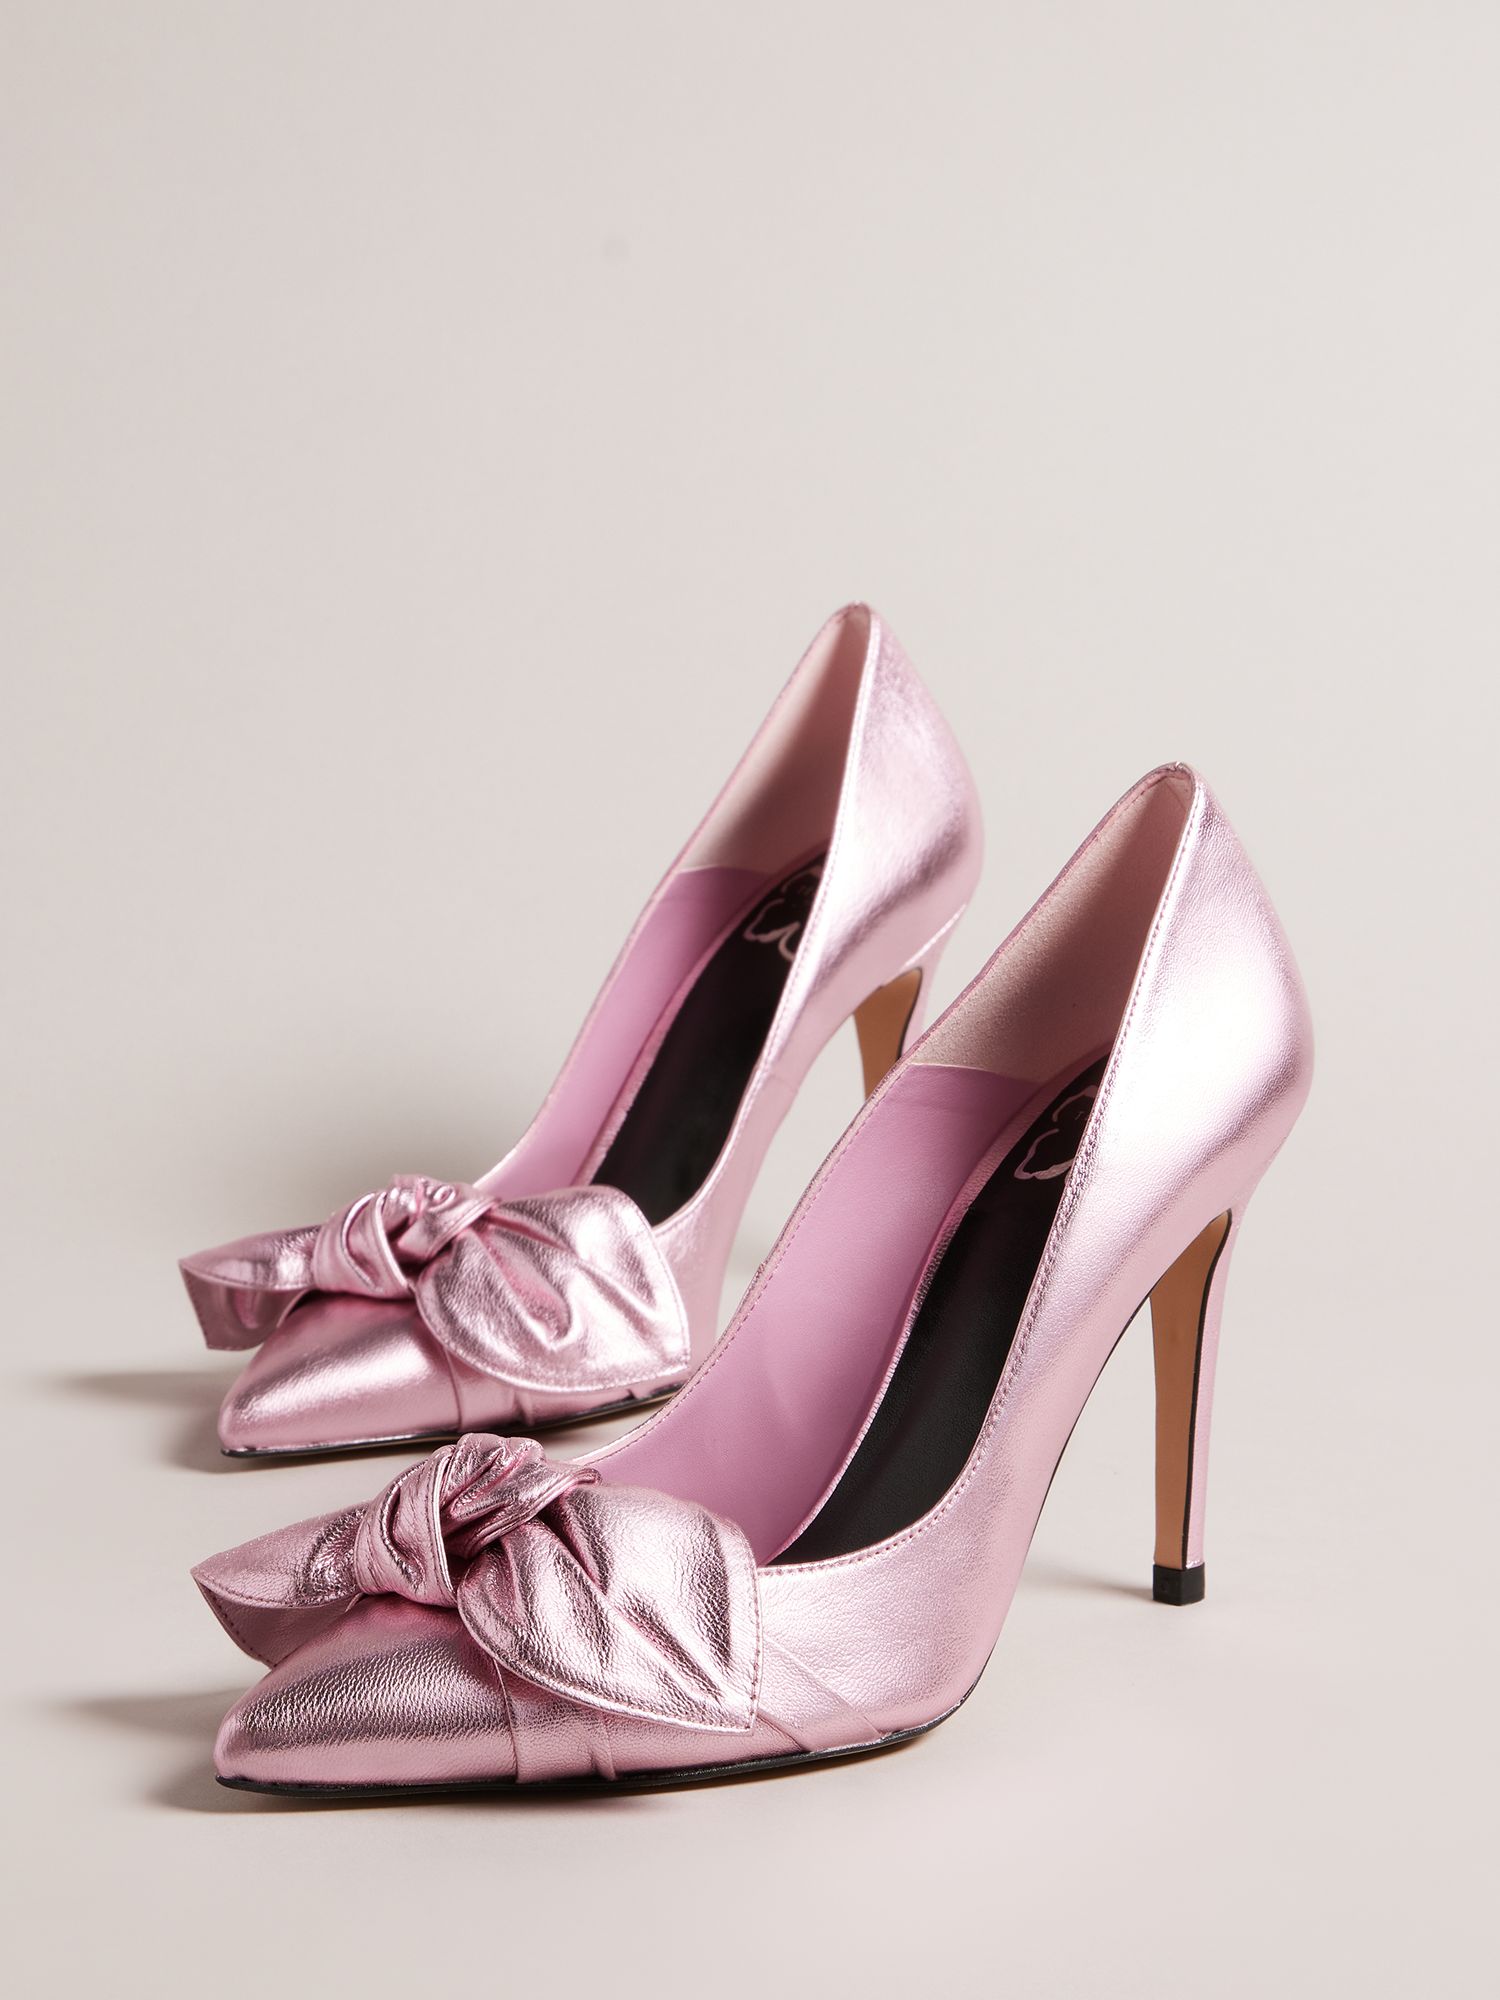 light pink high heels with bow